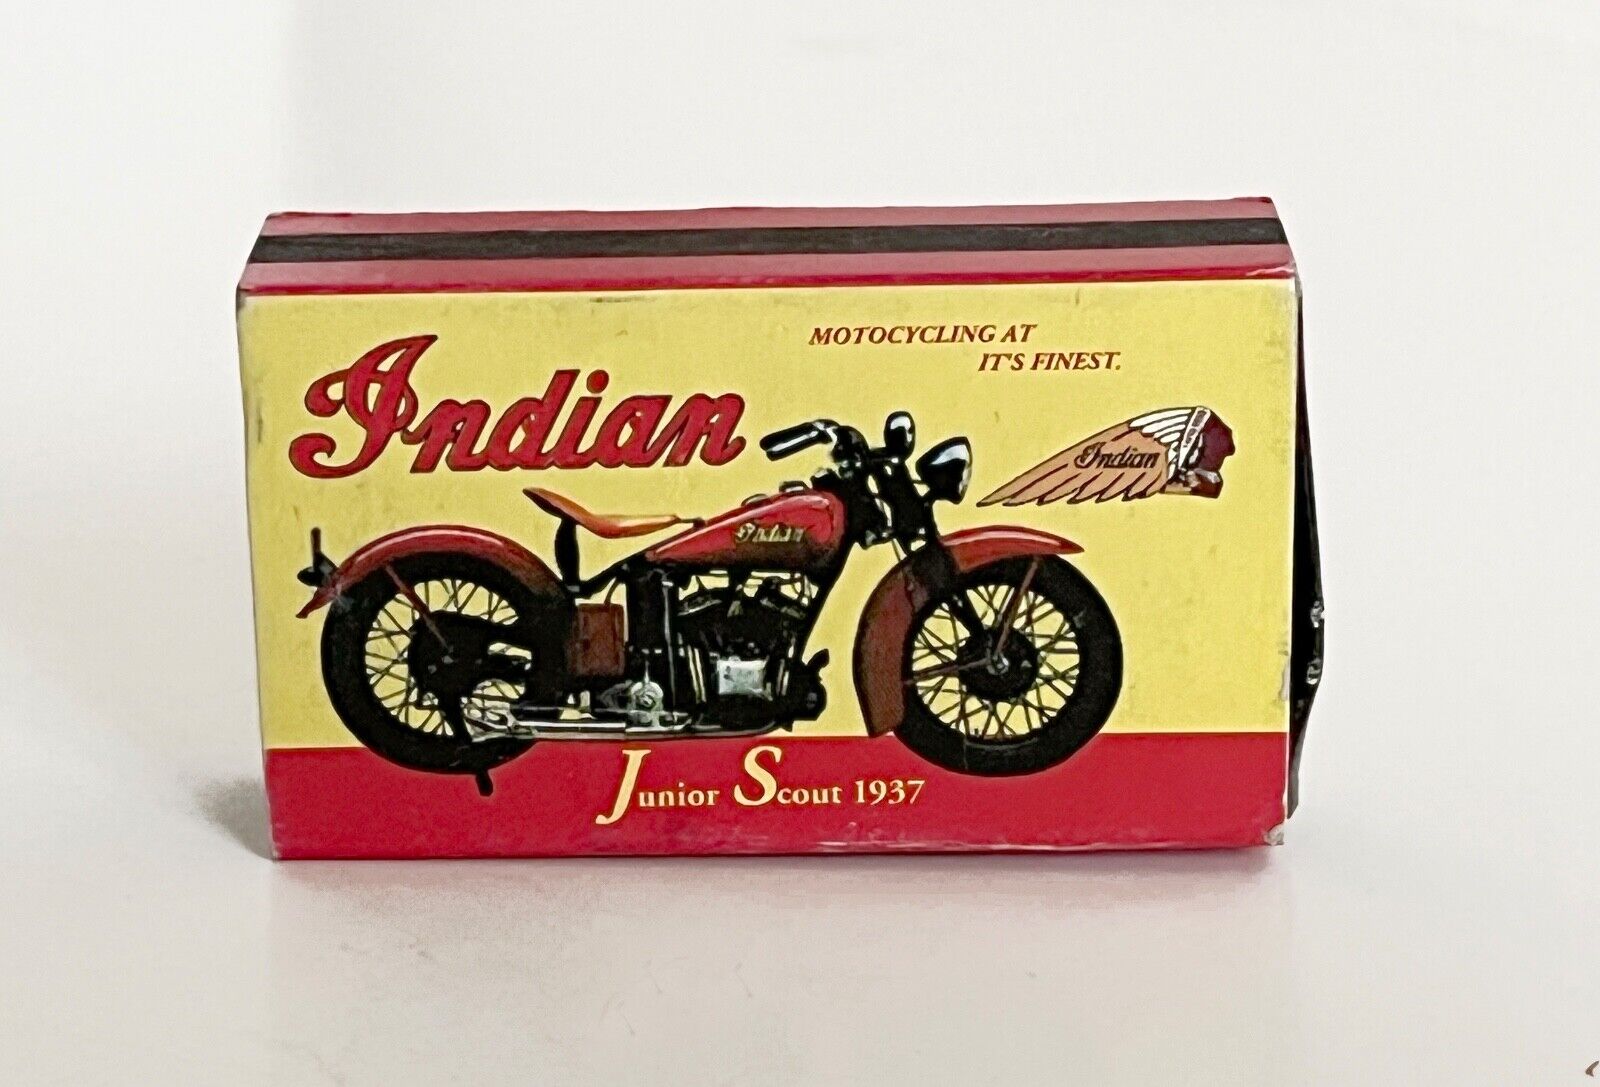 Vintage INDIAN MOTORCYCLE Matchbox With Junior Scout 1937 Cover - Full